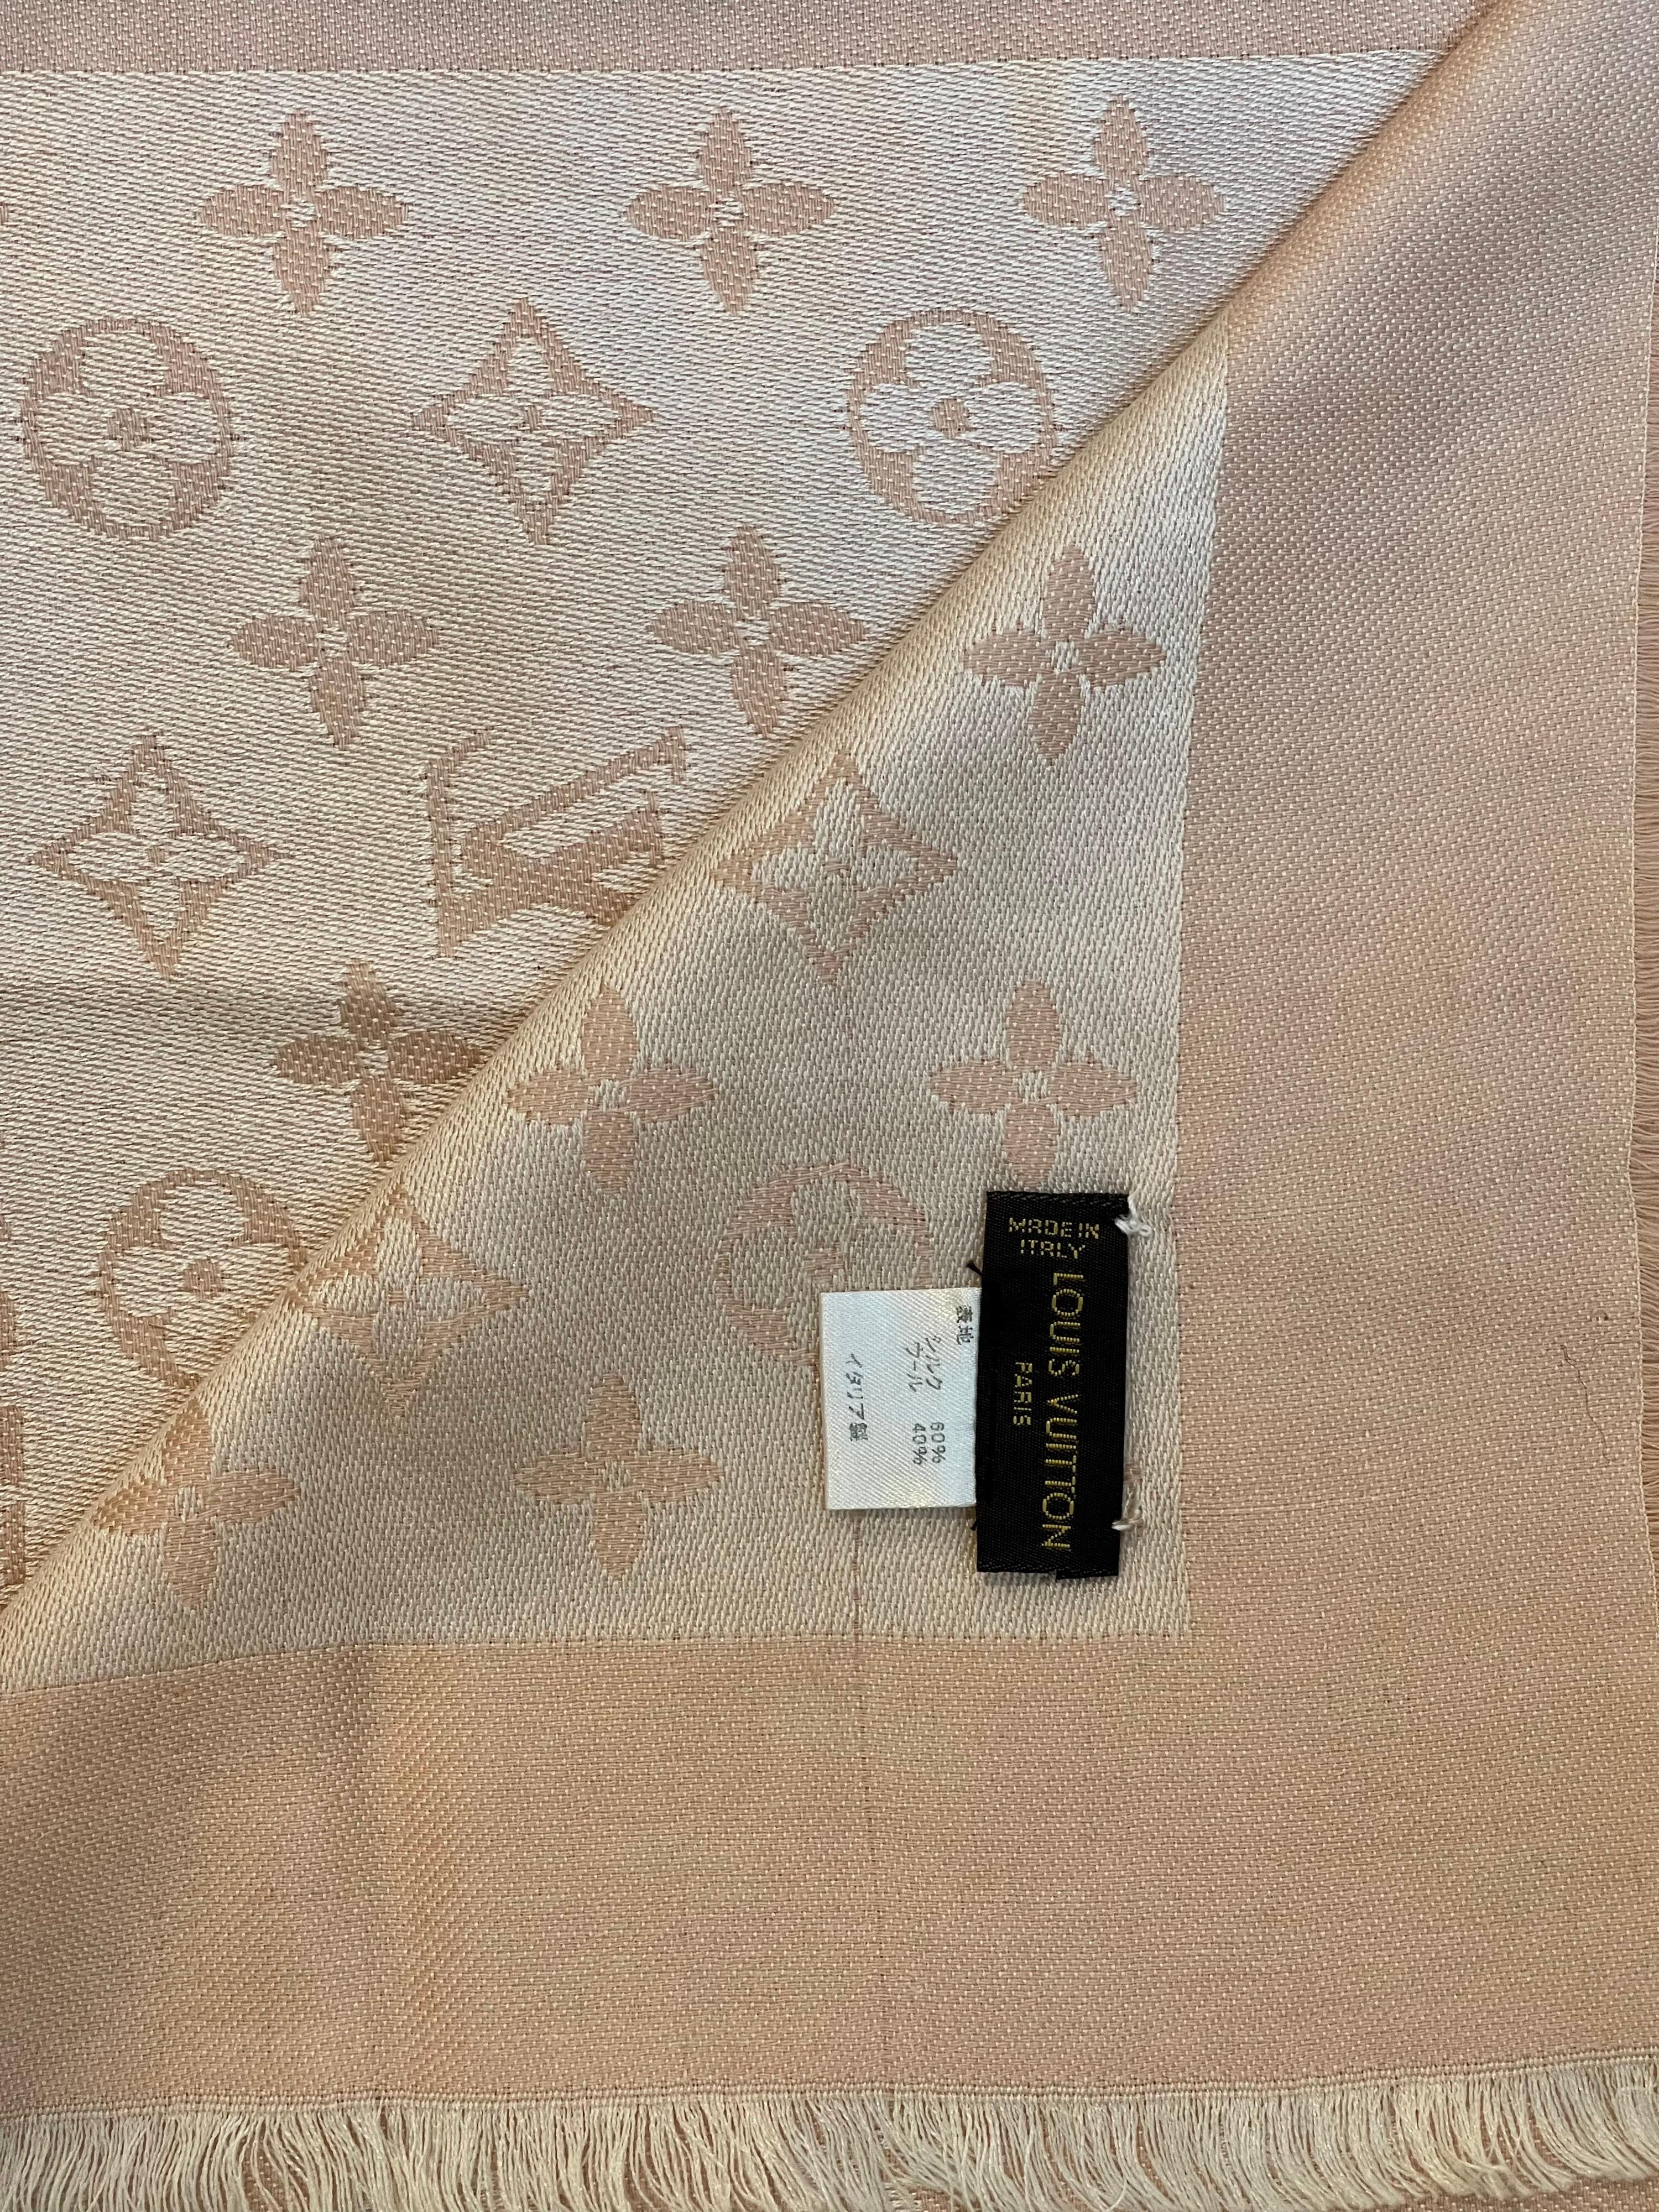  New Louis Vuitton Misty Pink  Monogram Shawl Scarf/Wrap Size 56X56 in good condition 
Take home this beautiful   monogram shawl .
Three places i see spots. All pictures are of the actual shawl.
Authentic Louis Vuitton  Misty Pink  Monogram Shawl